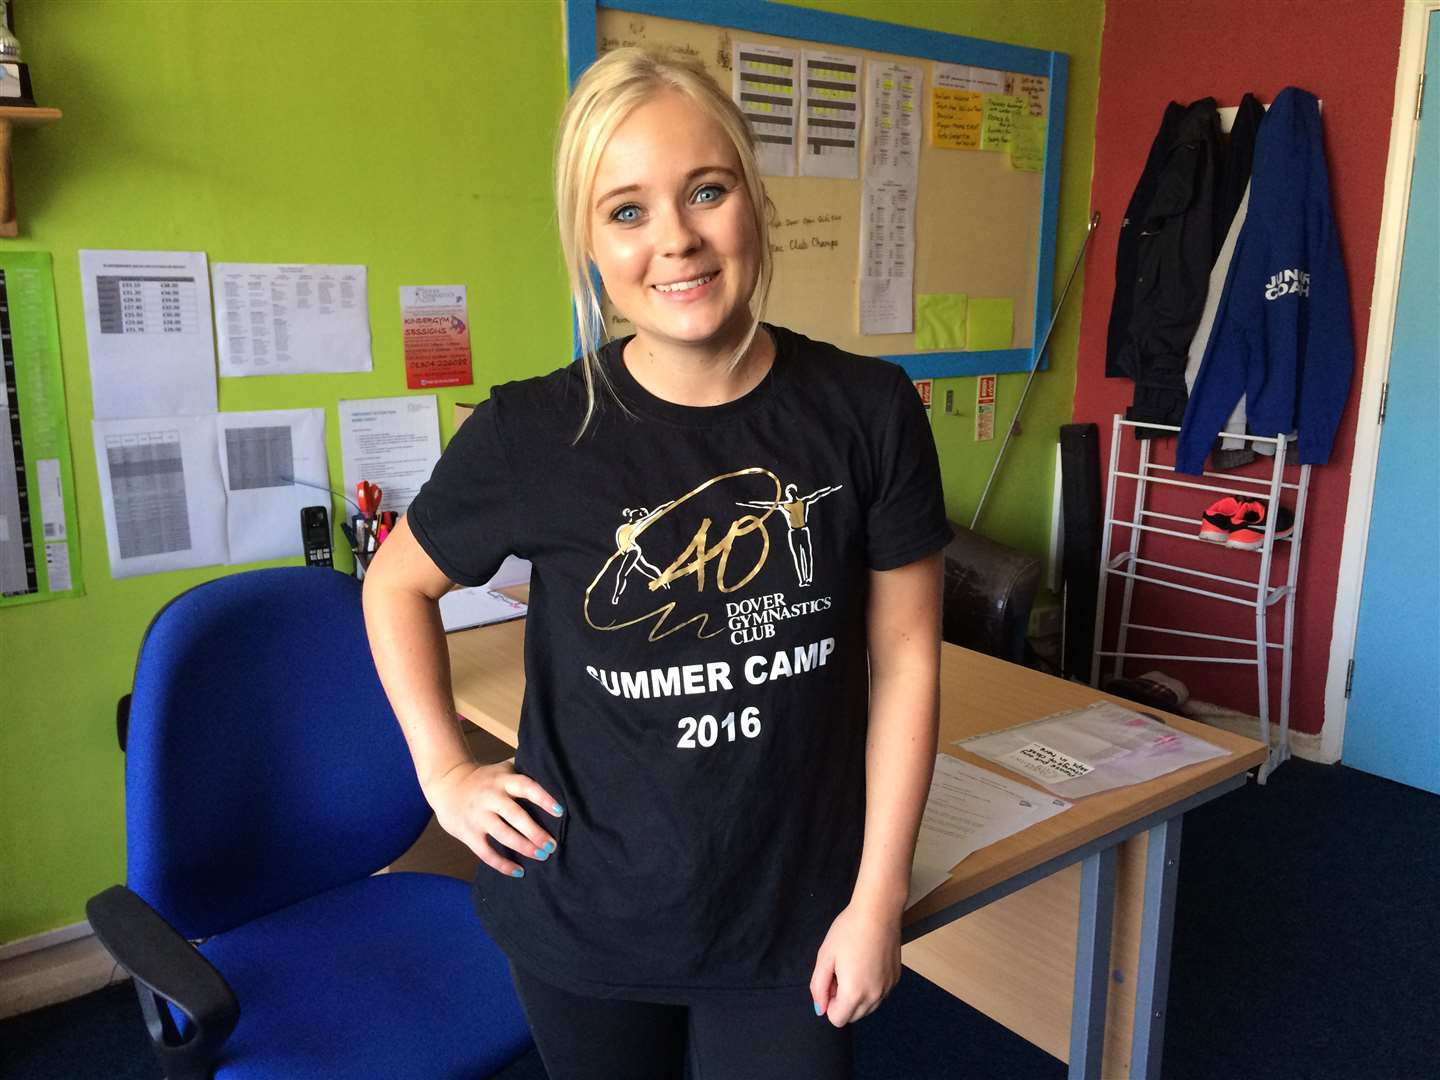 Becki Skelton of Dover Gymnastics Club has seen a rise in inquiries since the Olympics